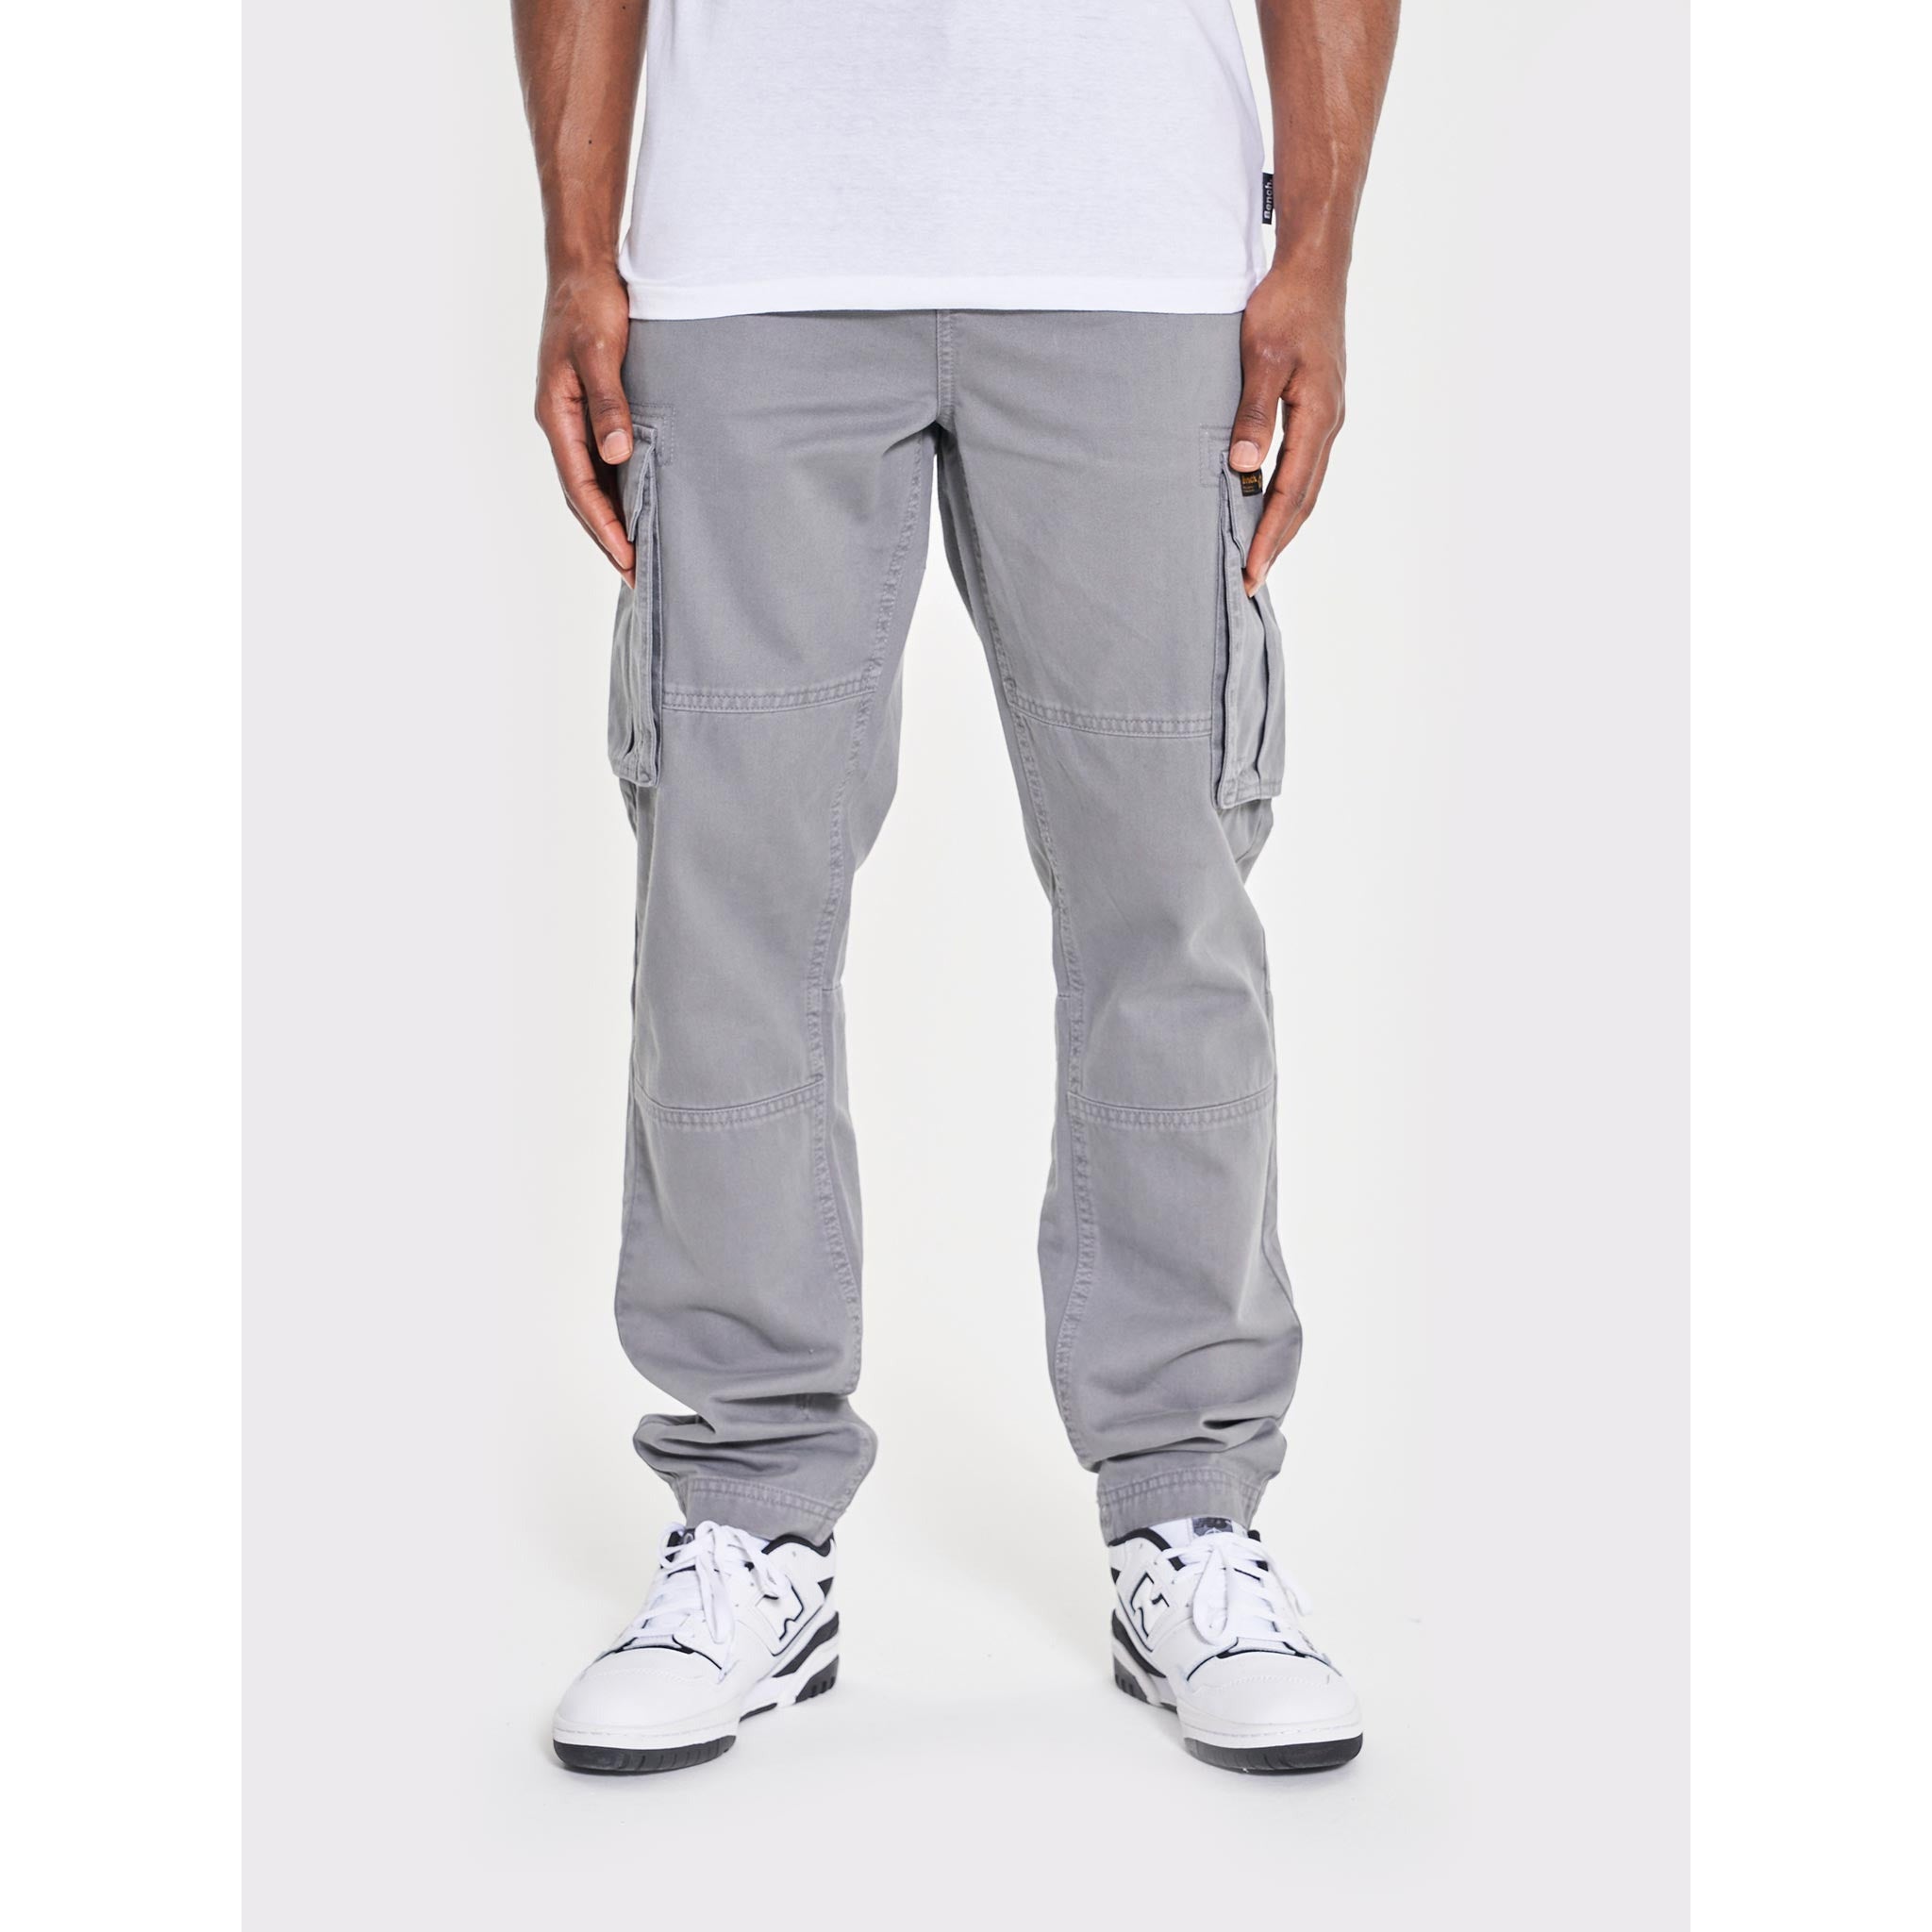 Trousers | 'Sergei' Regular Fit Cotton Cargo Trousers | Bench